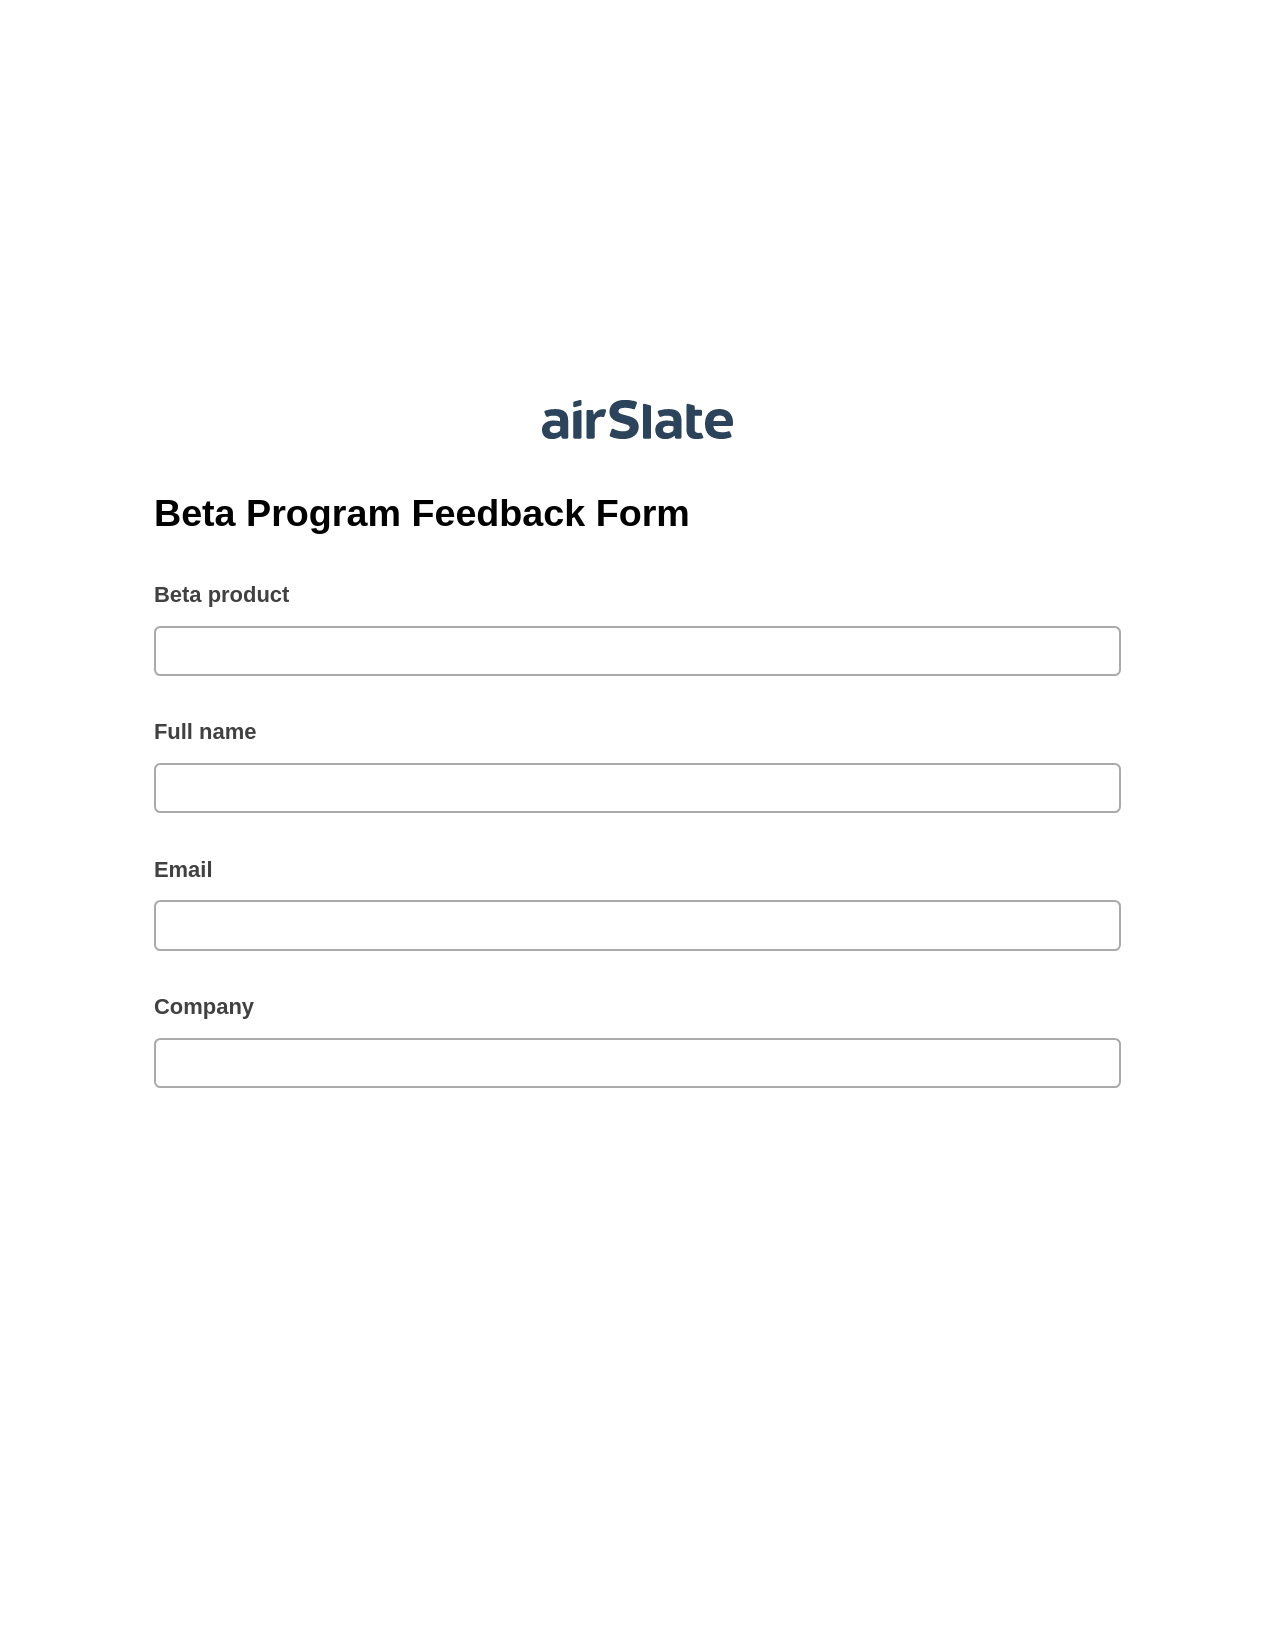 Multirole Beta Program Feedback Form Pre-fill from Litmos bot, Create MS Dynamics 365 Records Bot, Export to Excel 365 Bot